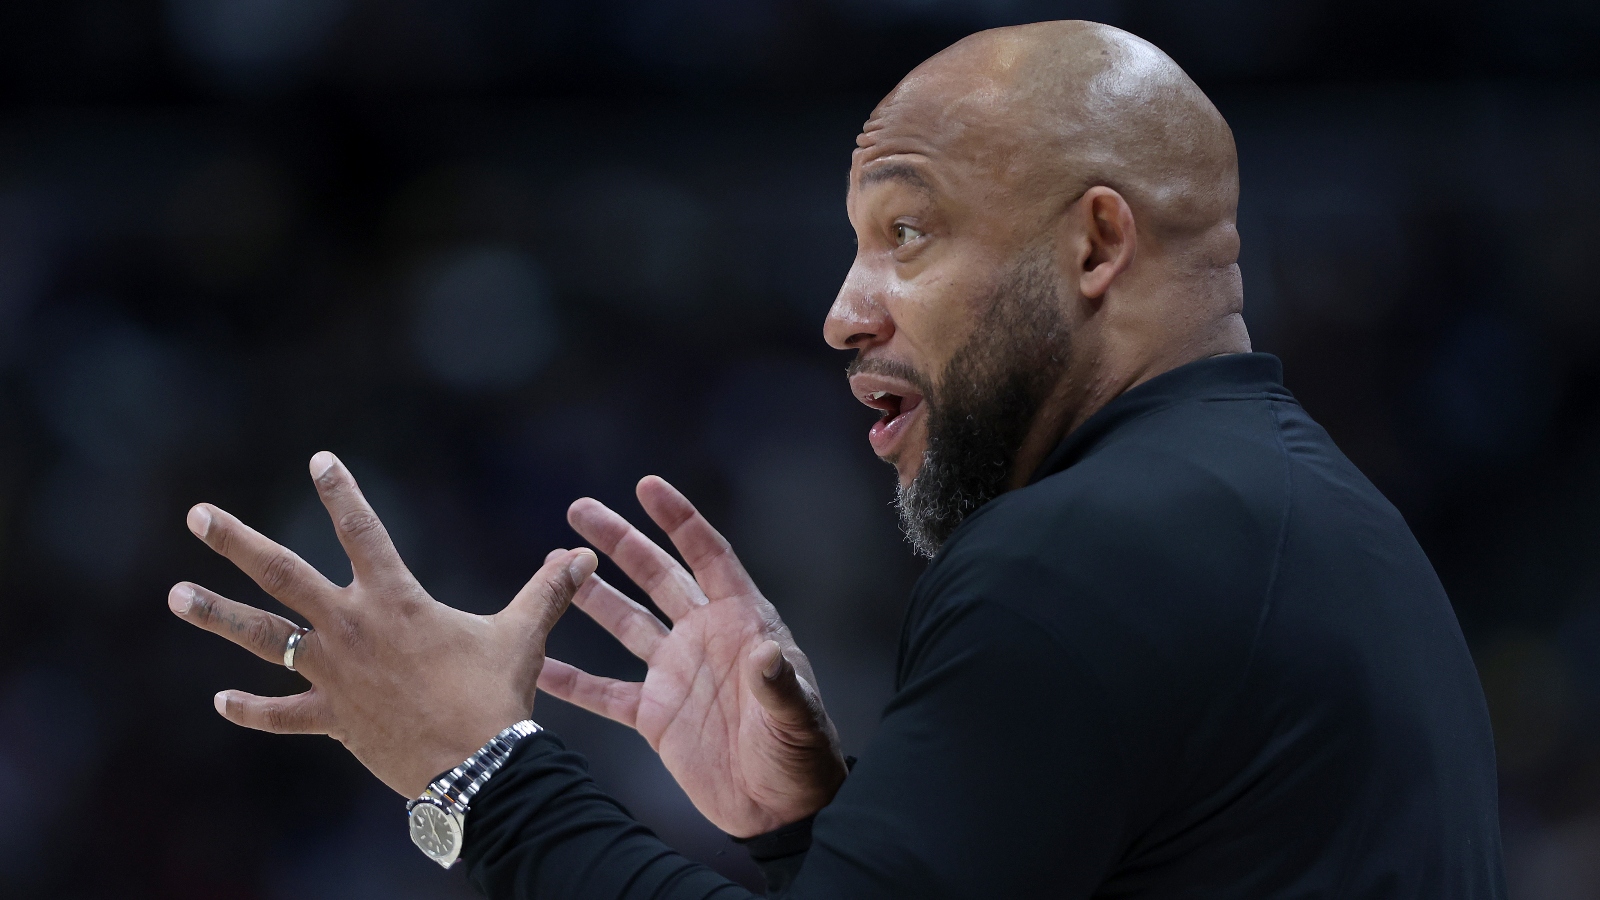 Los Angeles Lakers coach Darvin Ham fired